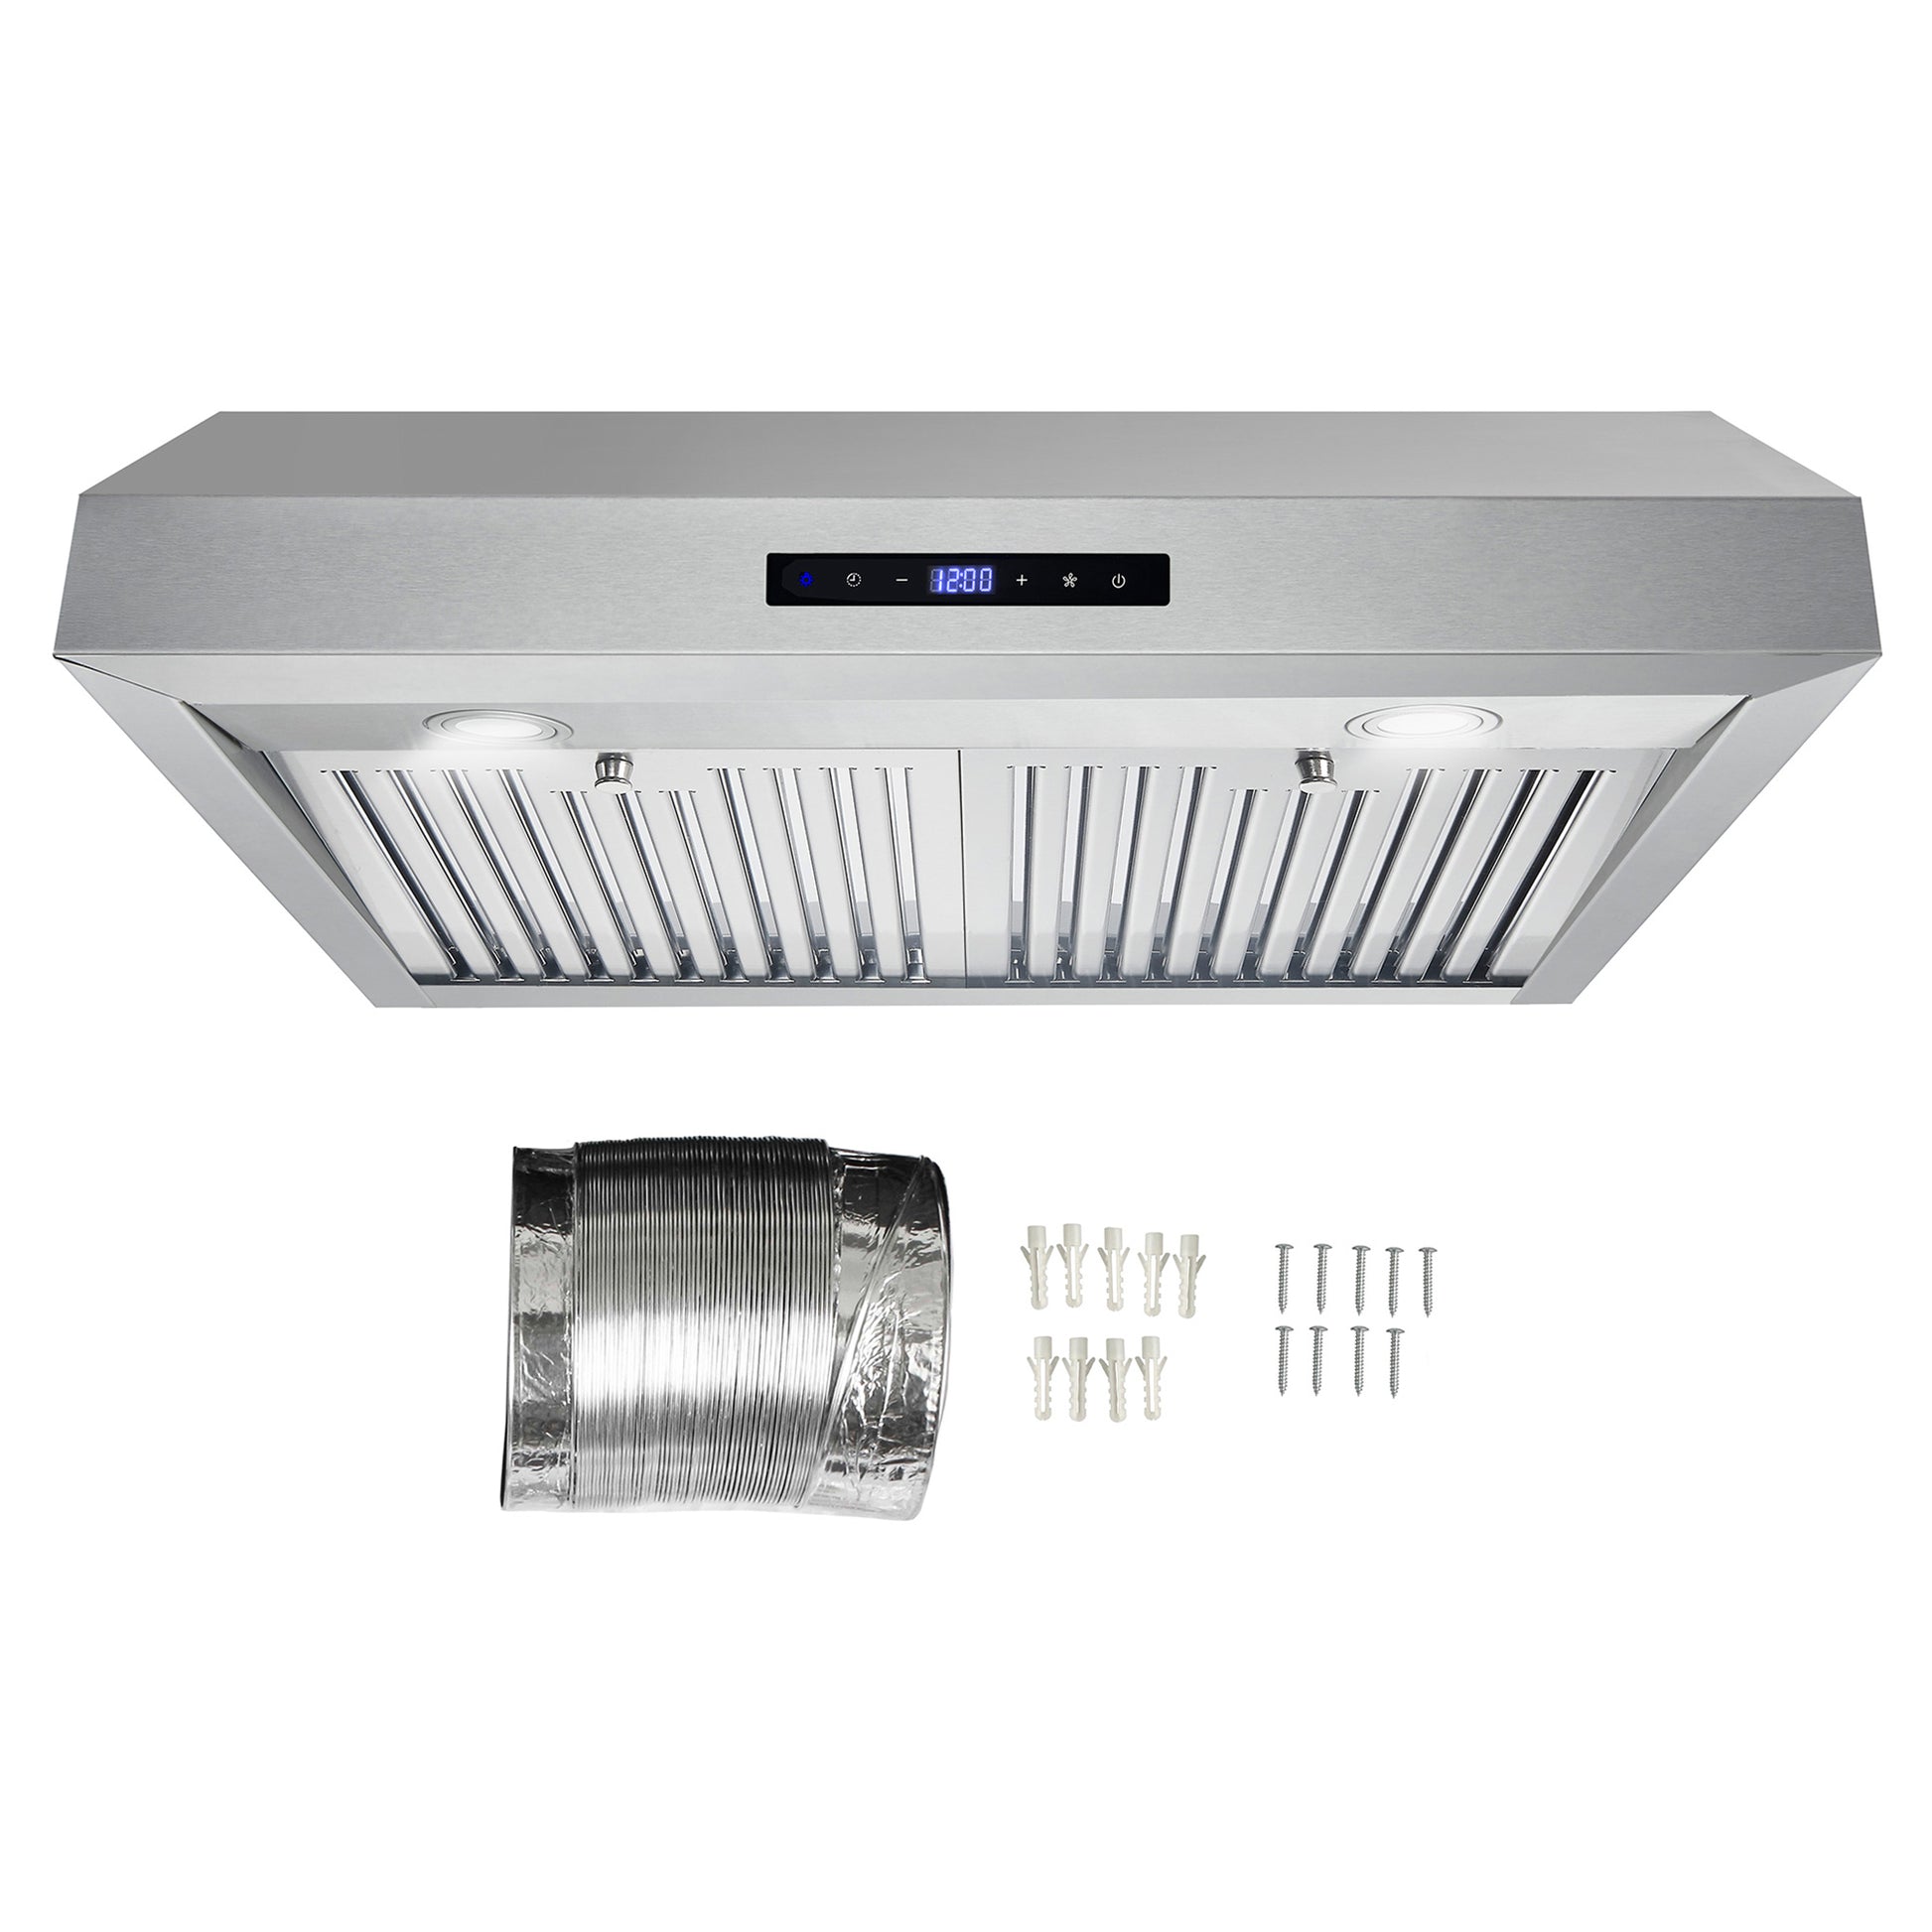 Cosmo 30 in. Stainless Steel Ductless Under Cabinet Range Hood with LED Light, 380 CFM, Permanent Filters